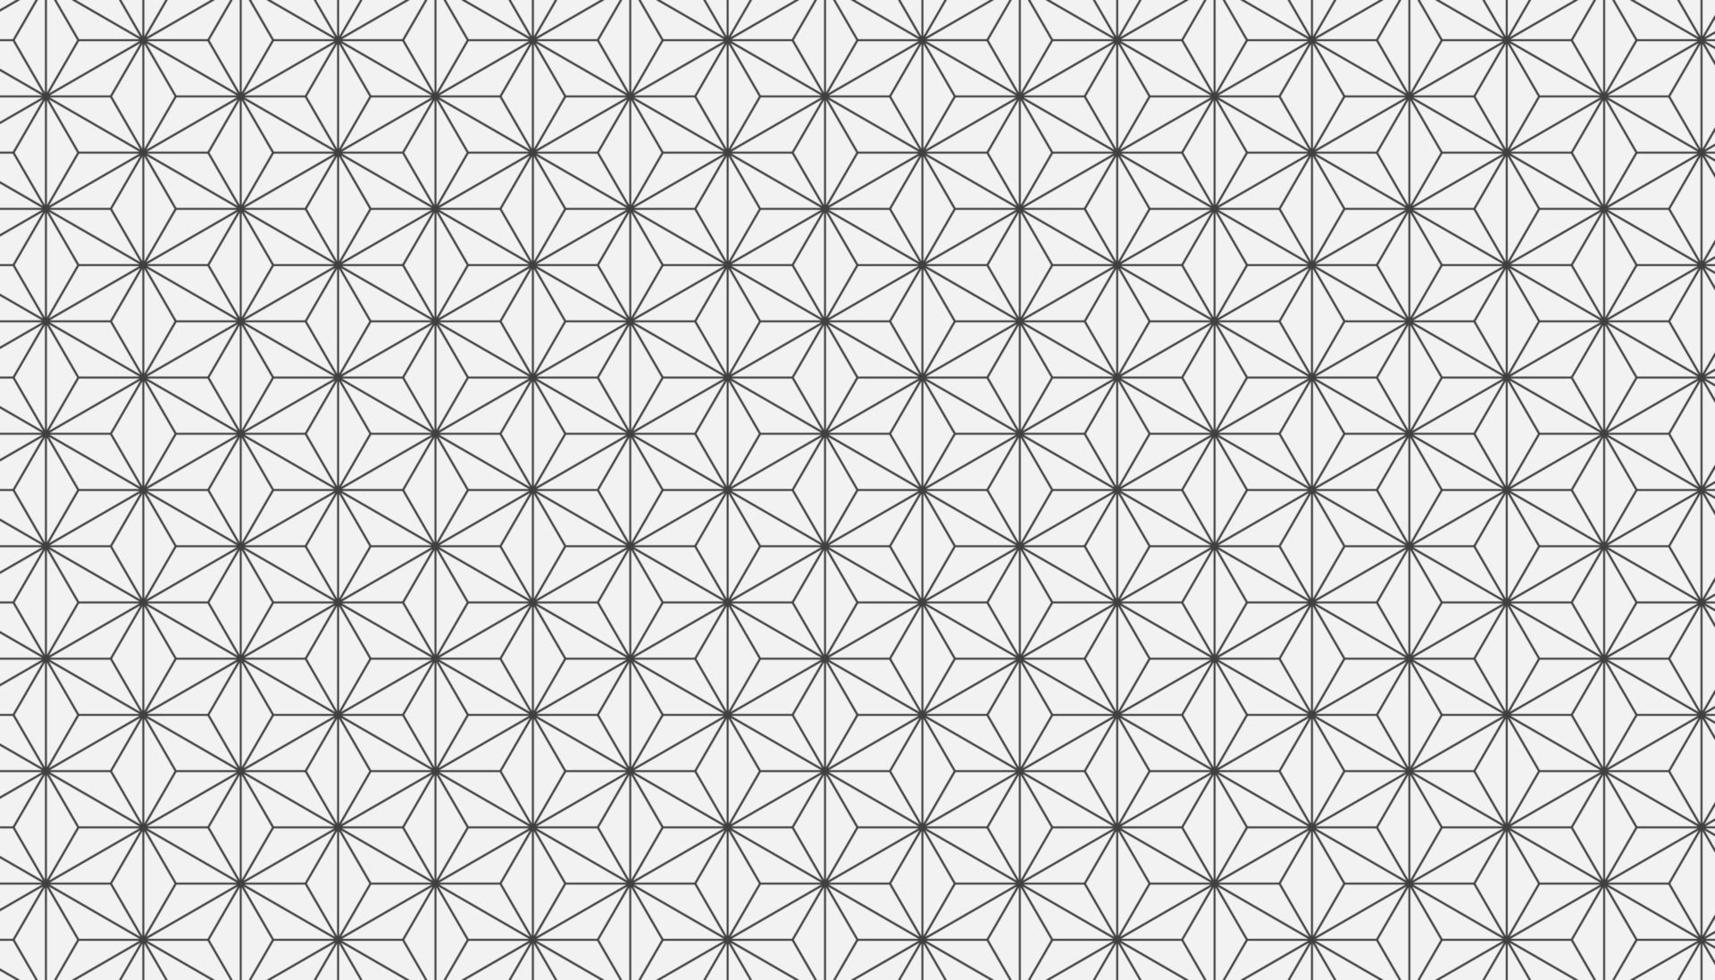 Japanese style grey asanoha seamless pattern. Isometric hemp leaf seed vector background. Geometric 3d lines hexagon and star structure.